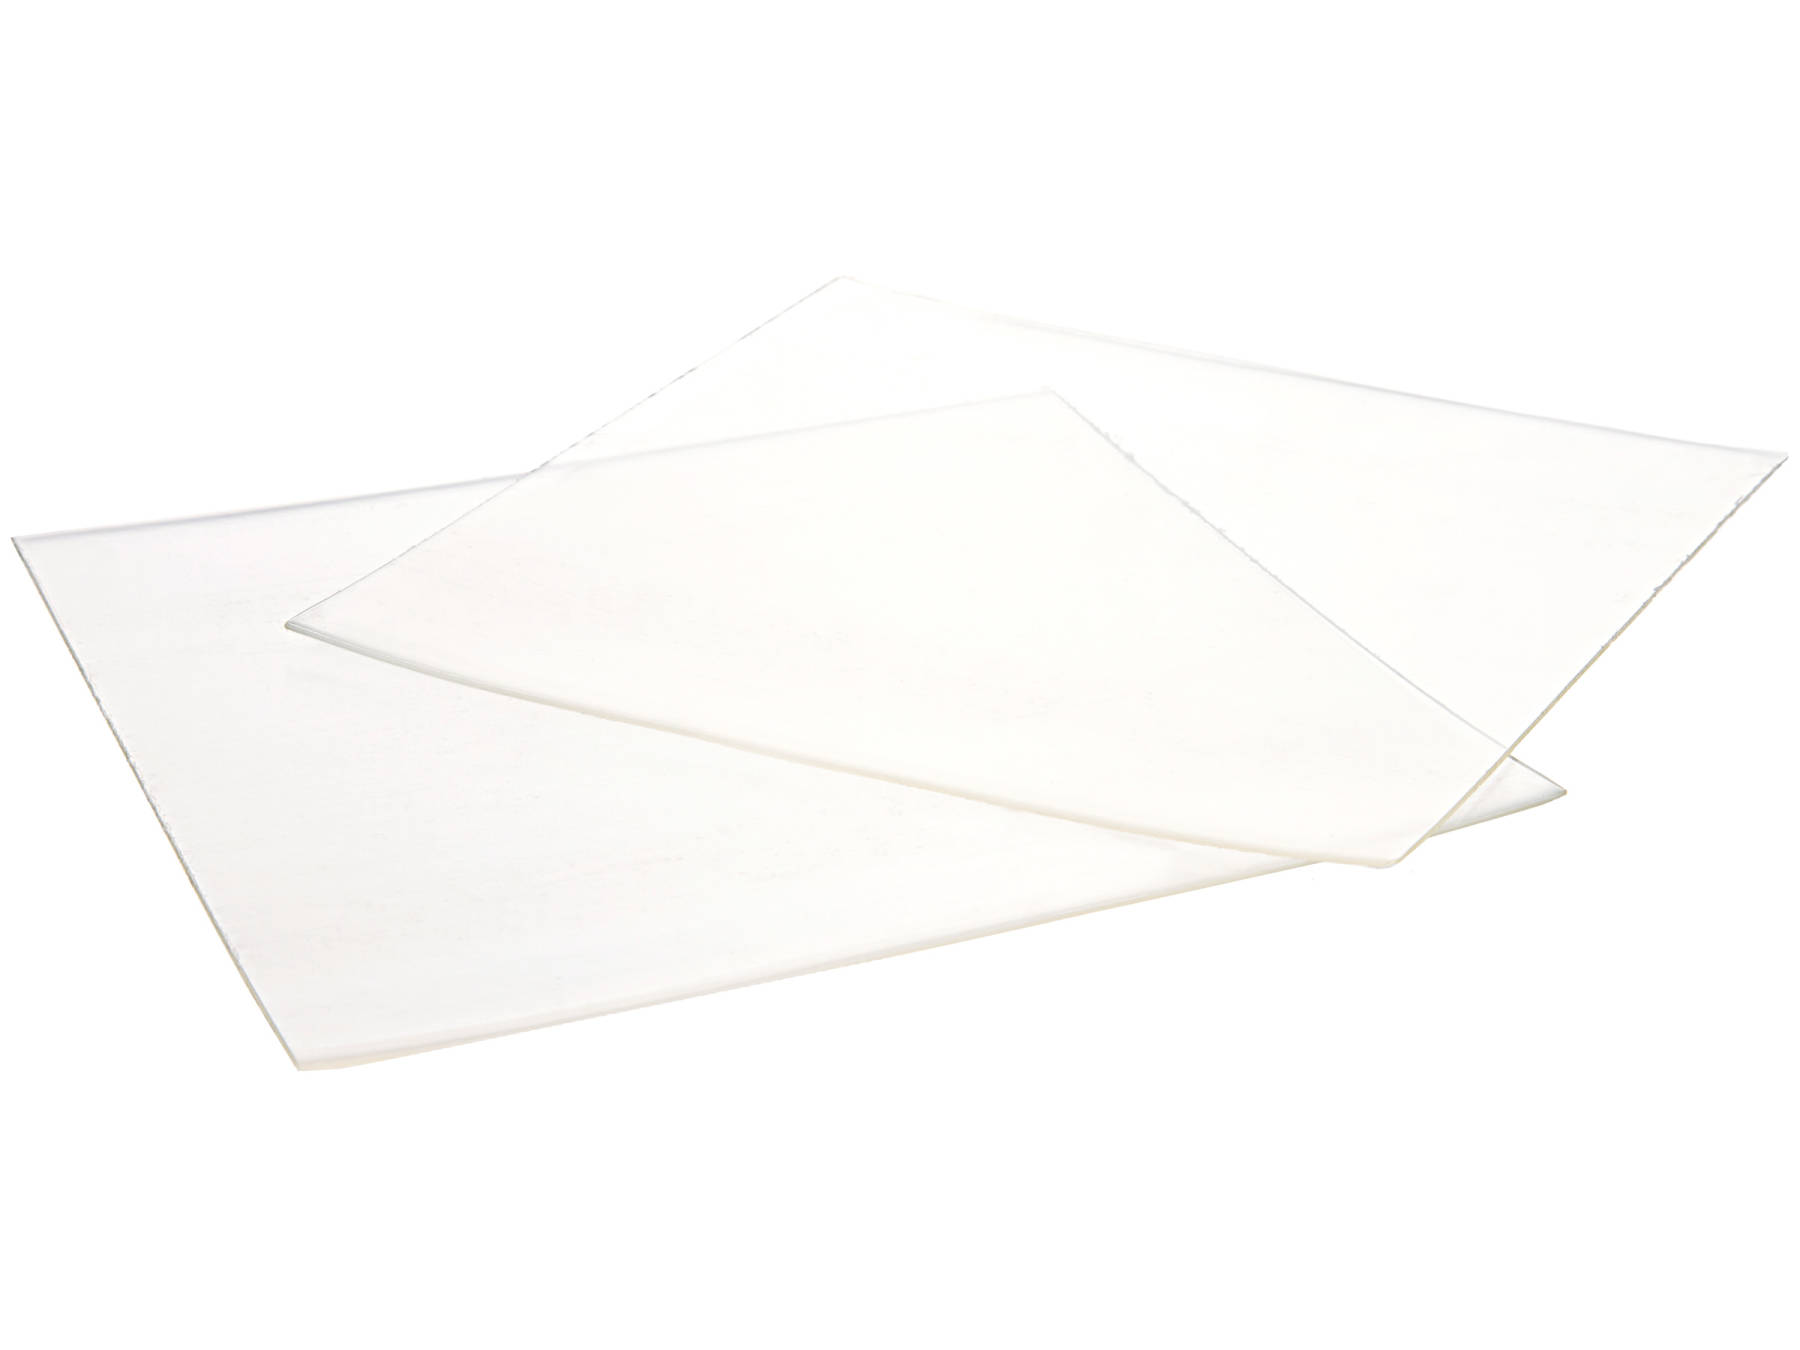 Sof-Tray™ Classic Sheets-Sheet Material for Vacuum-Forming of Trays